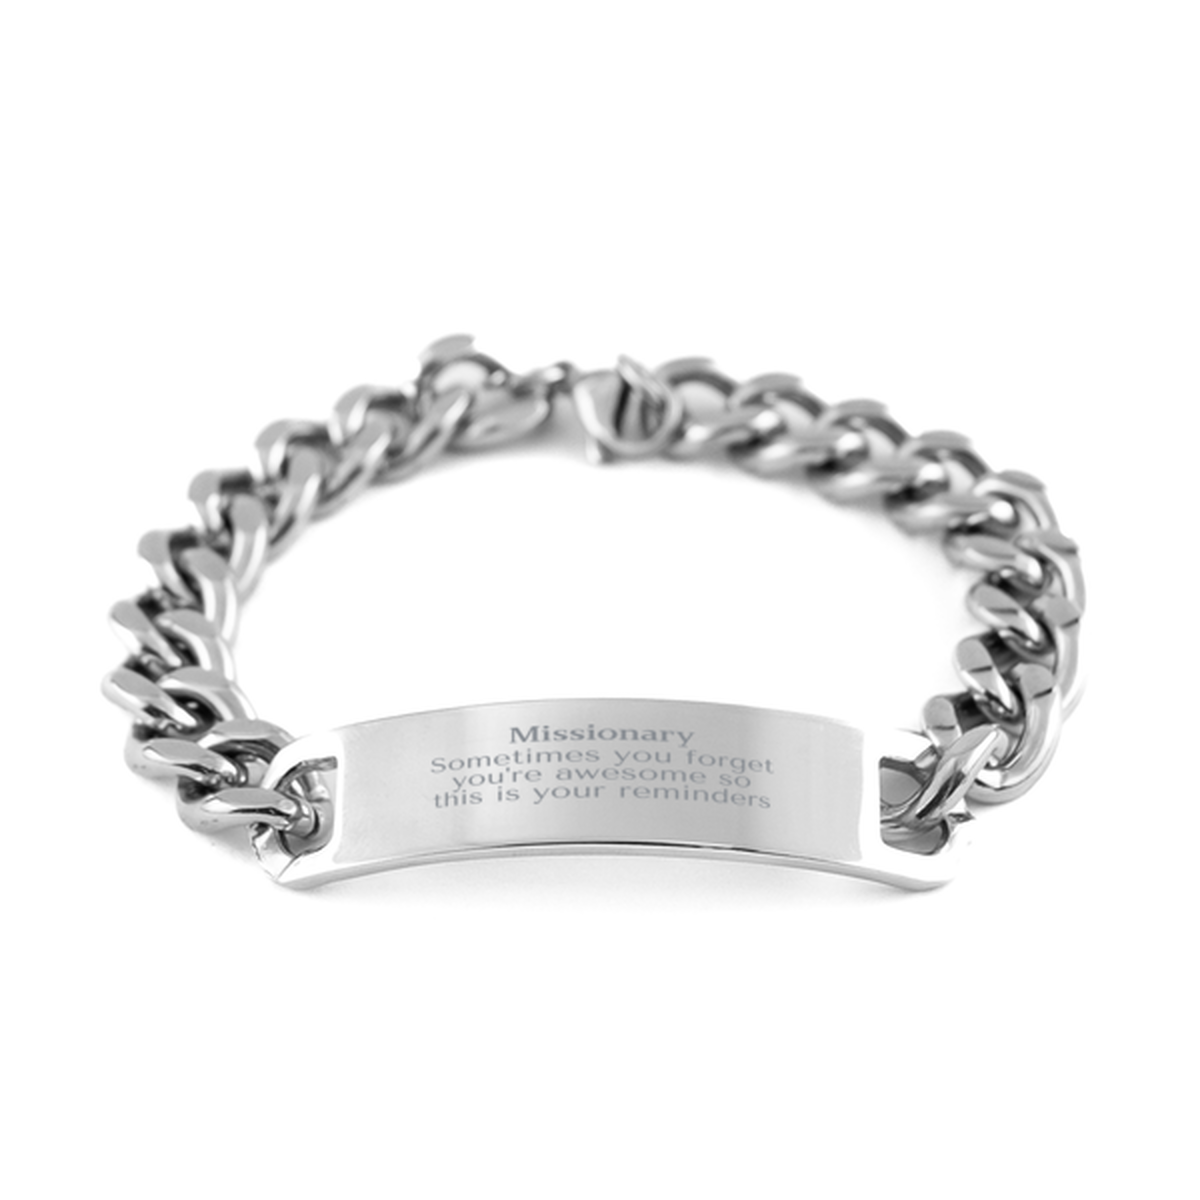 Sentimental Missionary Cuban Chain Stainless Steel Bracelet, Missionary Sometimes you forget you're awesome so this is your reminders, Graduation Christmas Birthday Gifts for Missionary, Men, Women, Coworkers